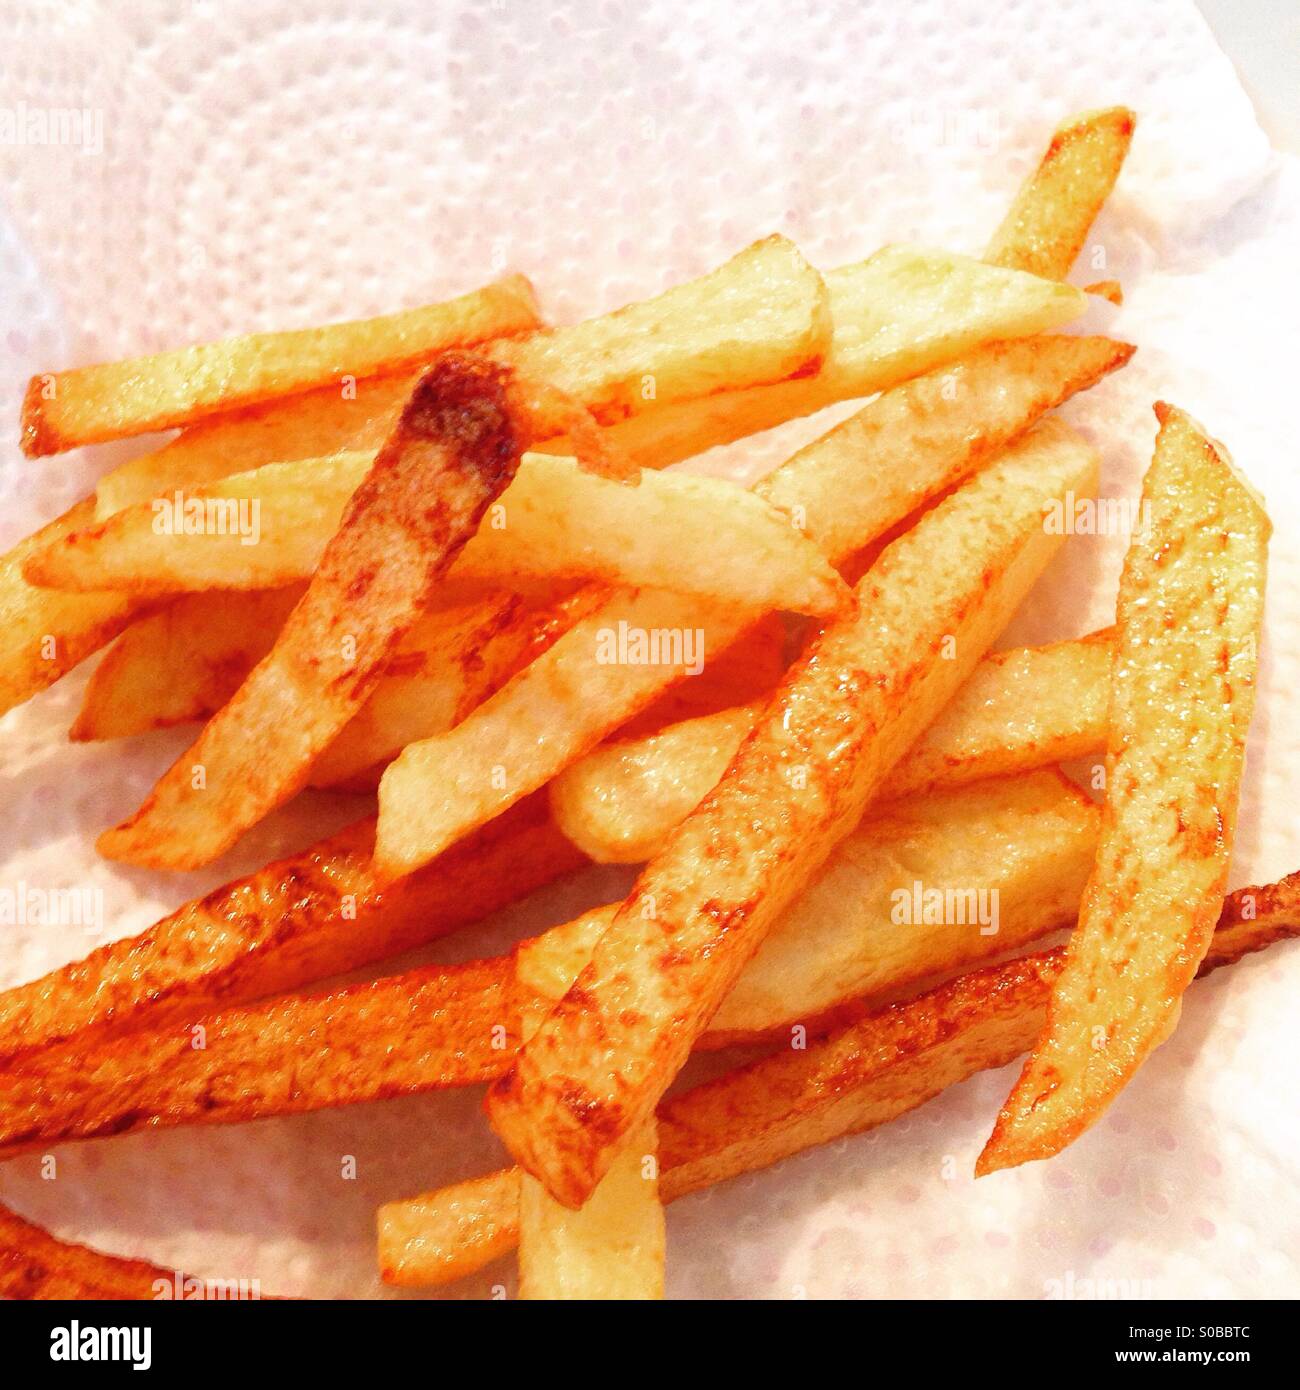 Homemade french fries Stock Photo